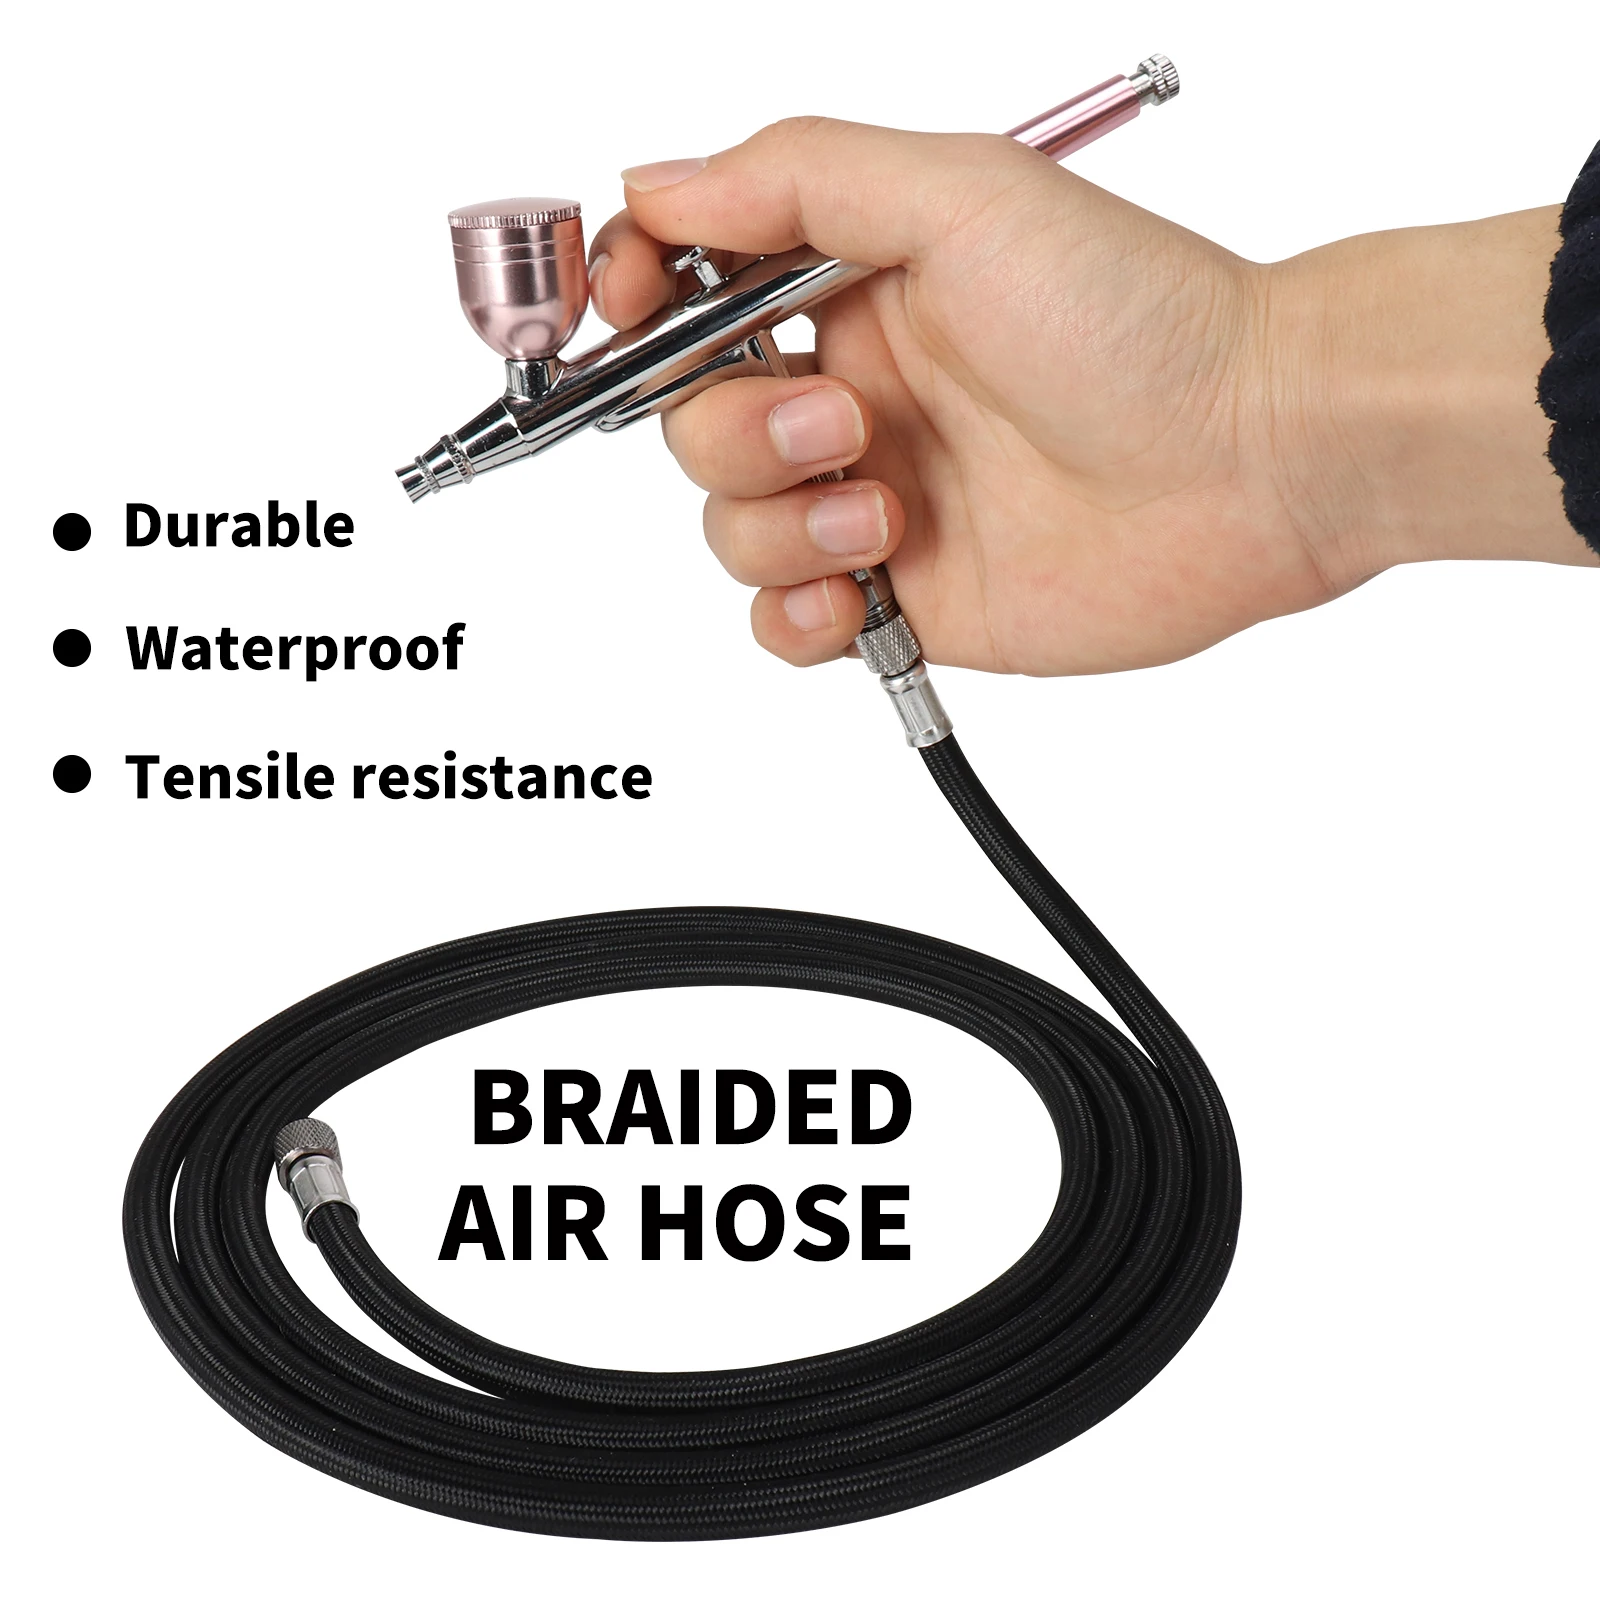 SAGUD Airbrush Hose 6 Foot Braided Rubber Hose with Standard 1/8 Size Fittings on Both End and Air Brush Quick Release Disconnect Coupler